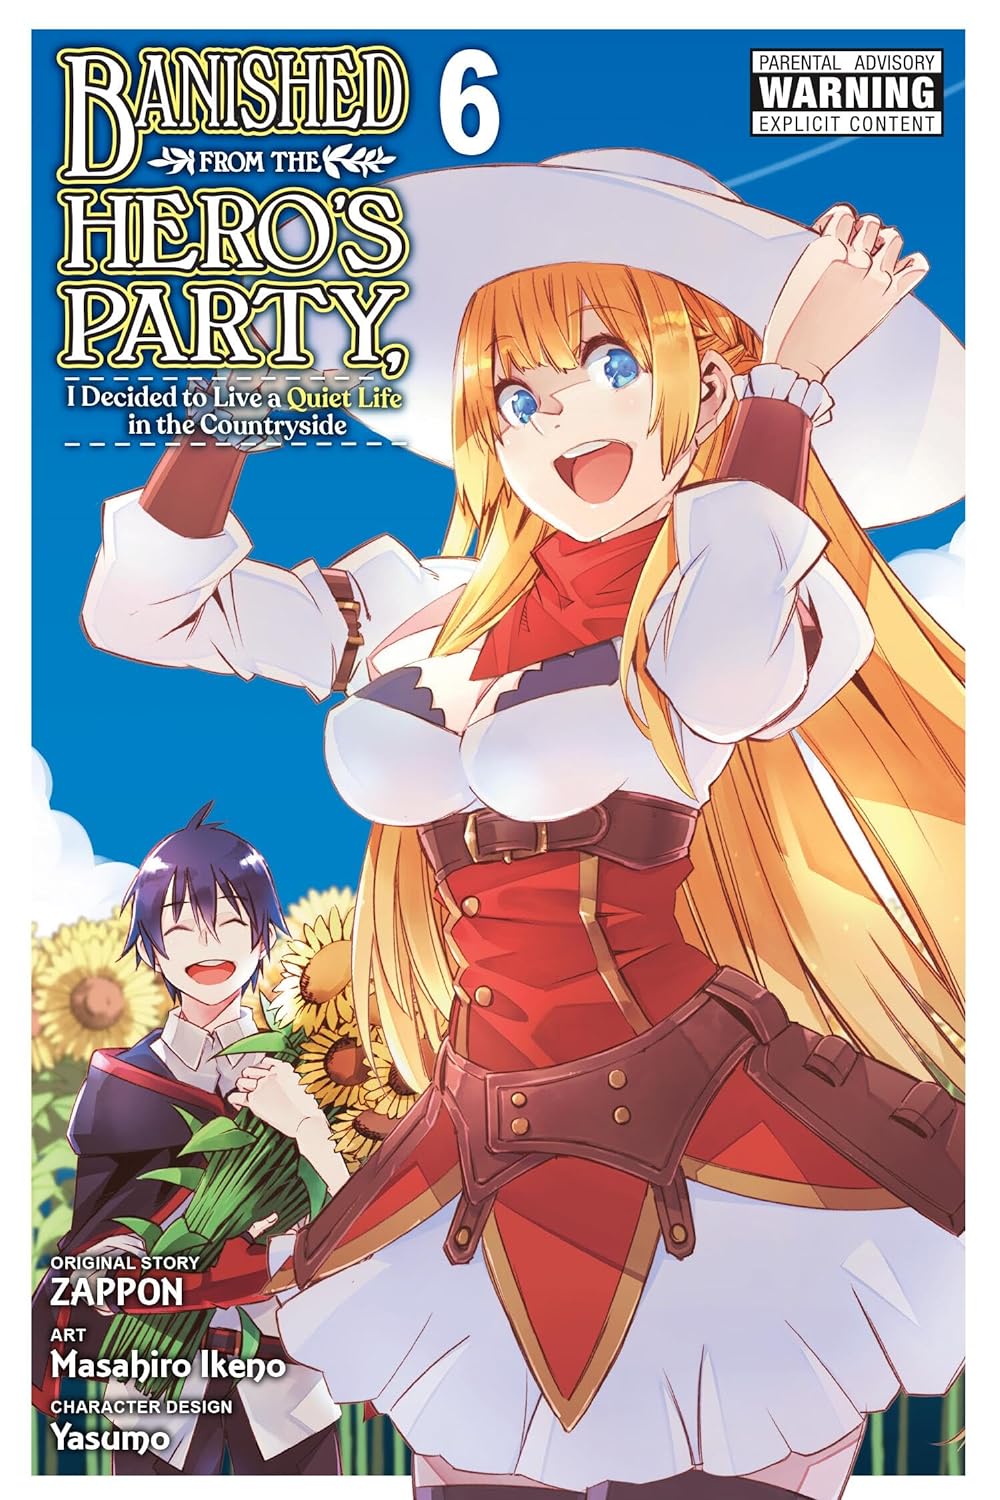 Banished from the Hero's Party, I Decided to Live a Quiet Life in the Countryside (Manga) Vol. 06